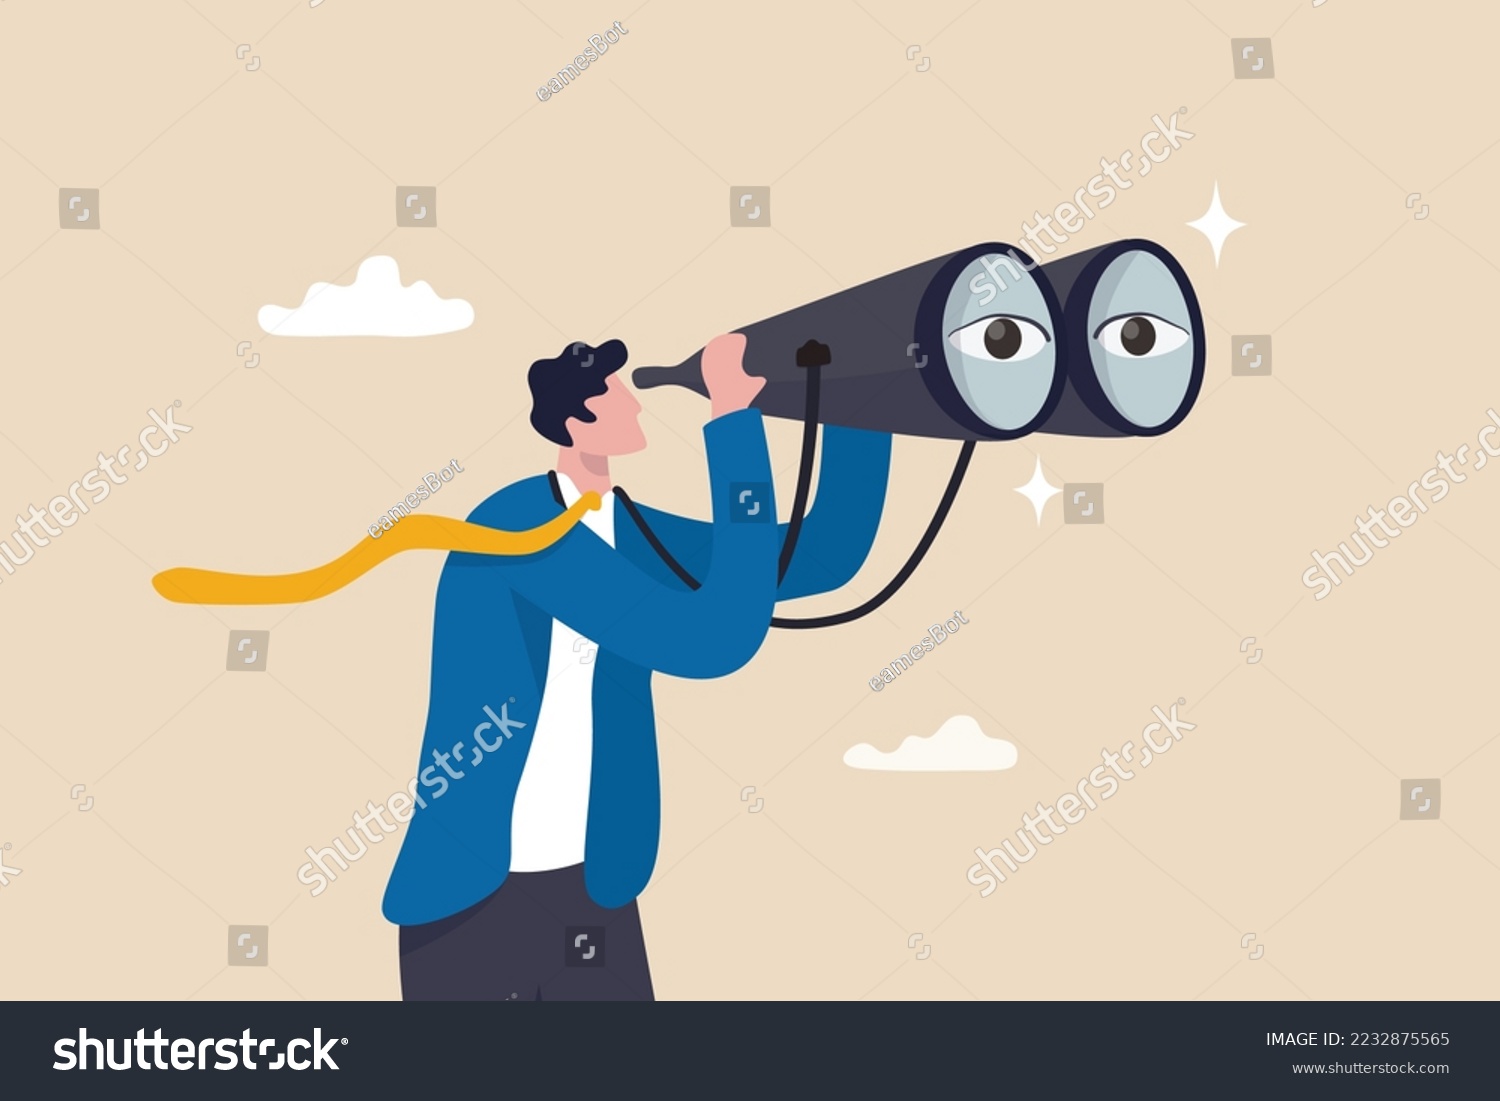 SVG of Observation, search for opportunity, curiosity or surveillance, inspect or discover new business, job search or hr finding candidate concept, curious businessman look through binoculars with big eyes. svg